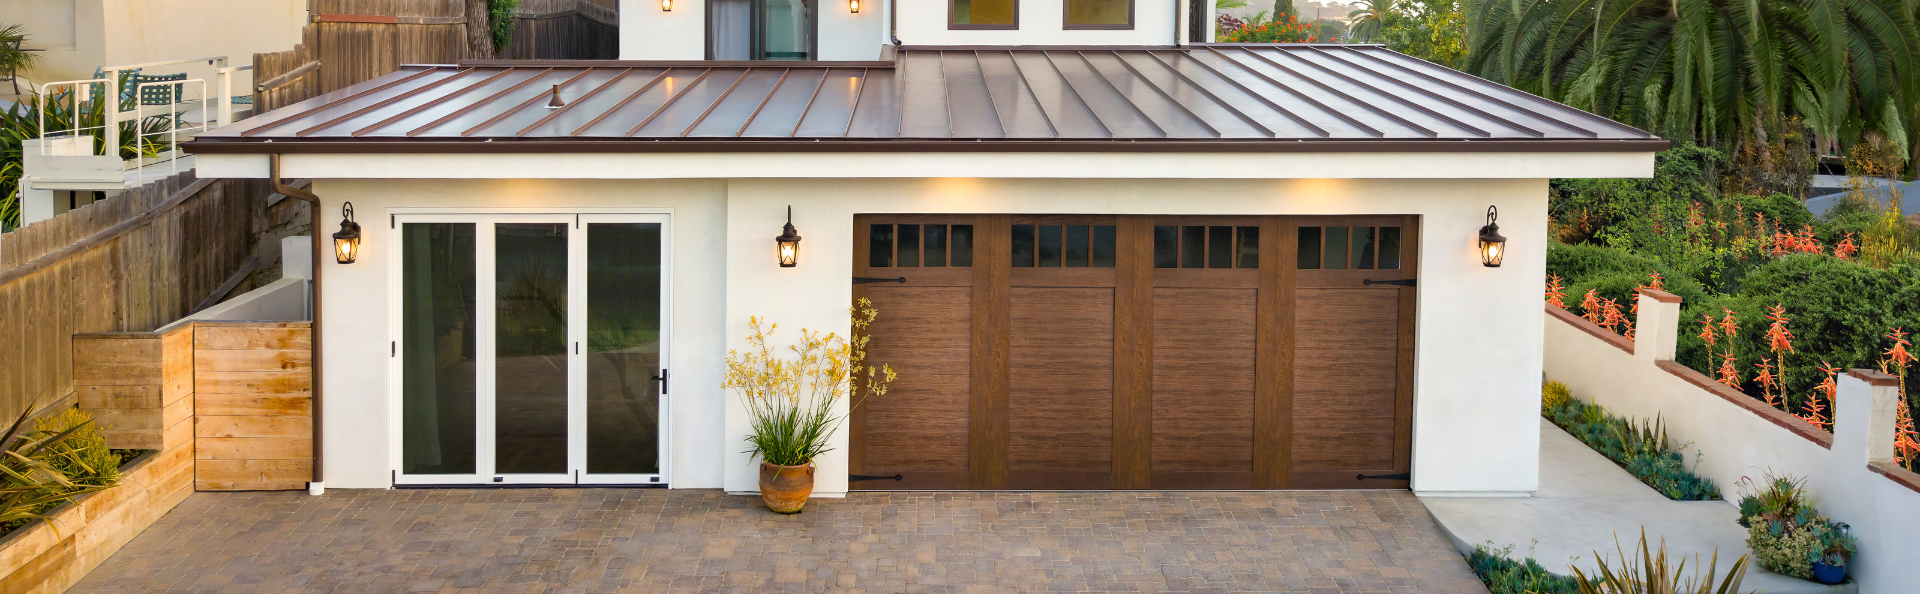 white house with brown metal roof and brown wood look garage door with windows